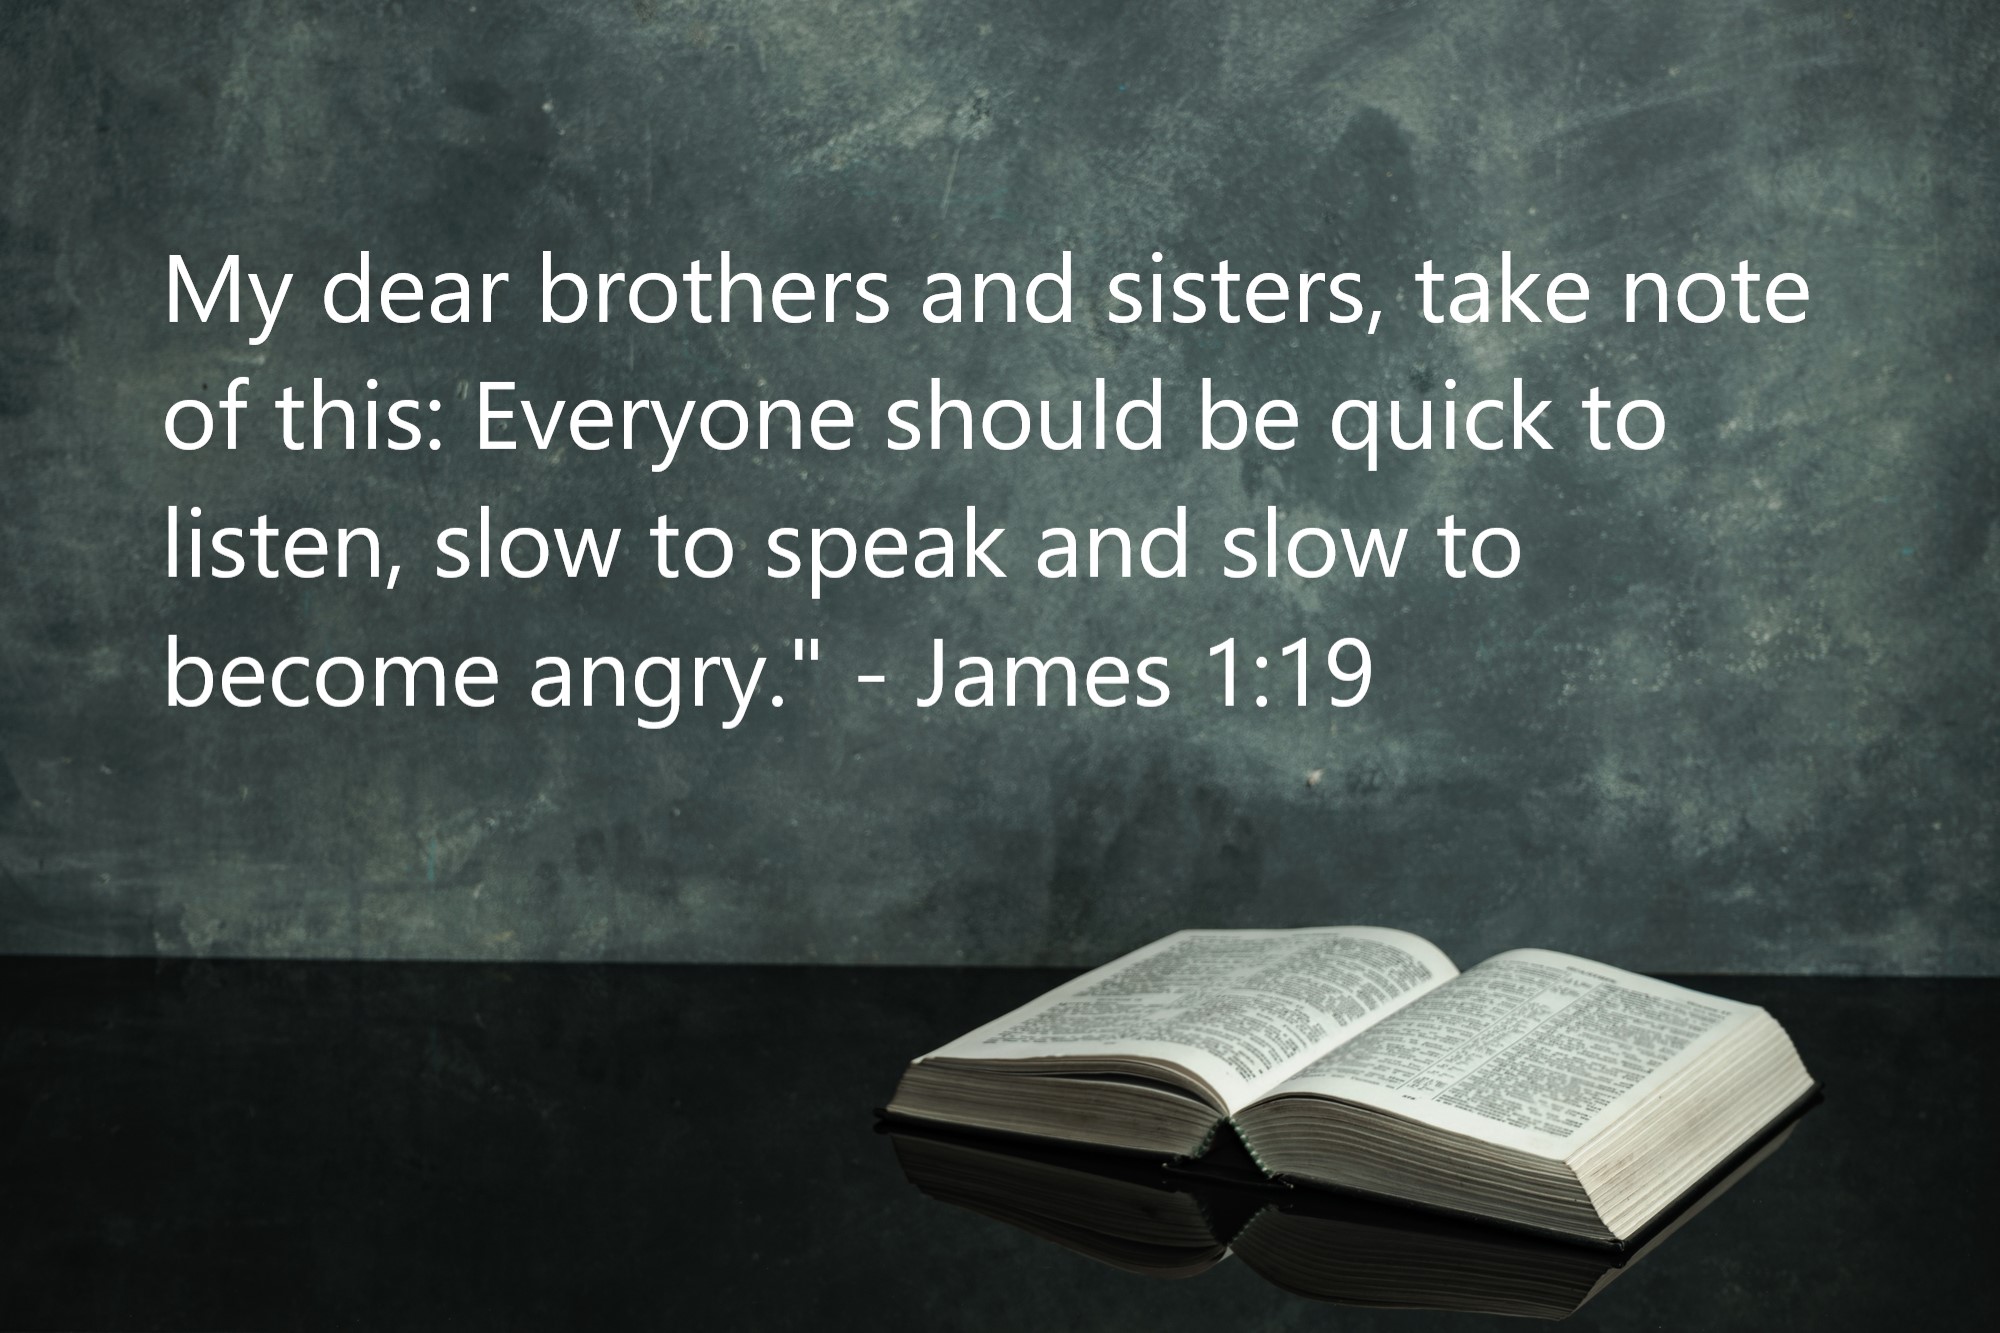 "My dear brothers and sisters, take note of this: Everyone should be quick to listen, slow to speak and slow to become angry." - James 1:19